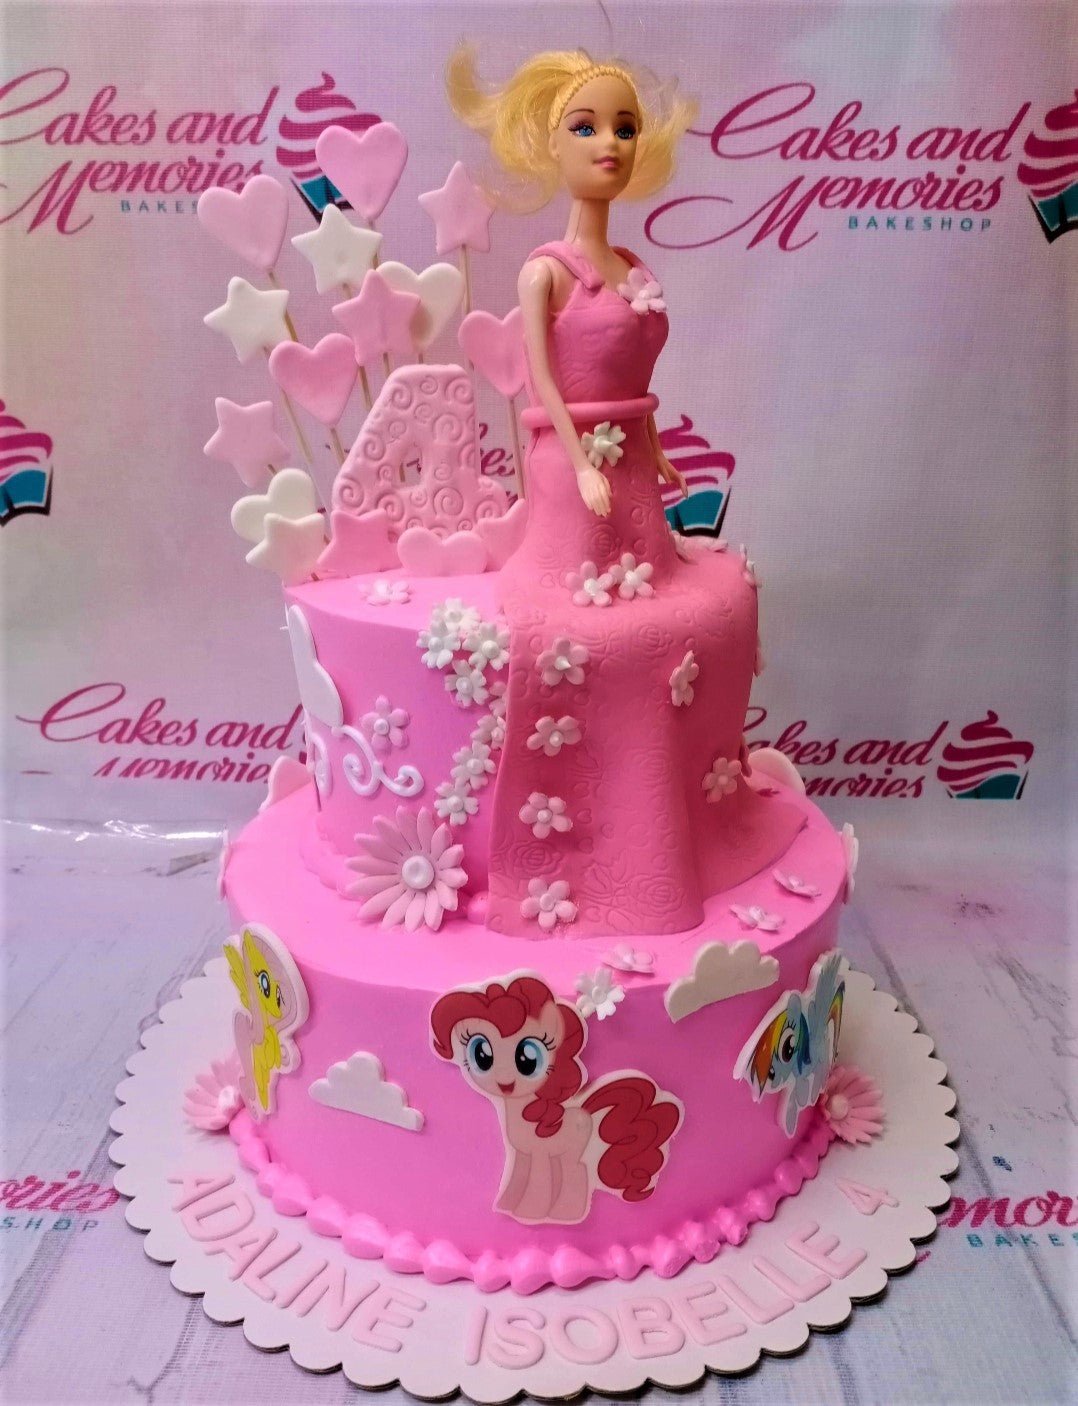 Pin on decorated cakes and cupcakes